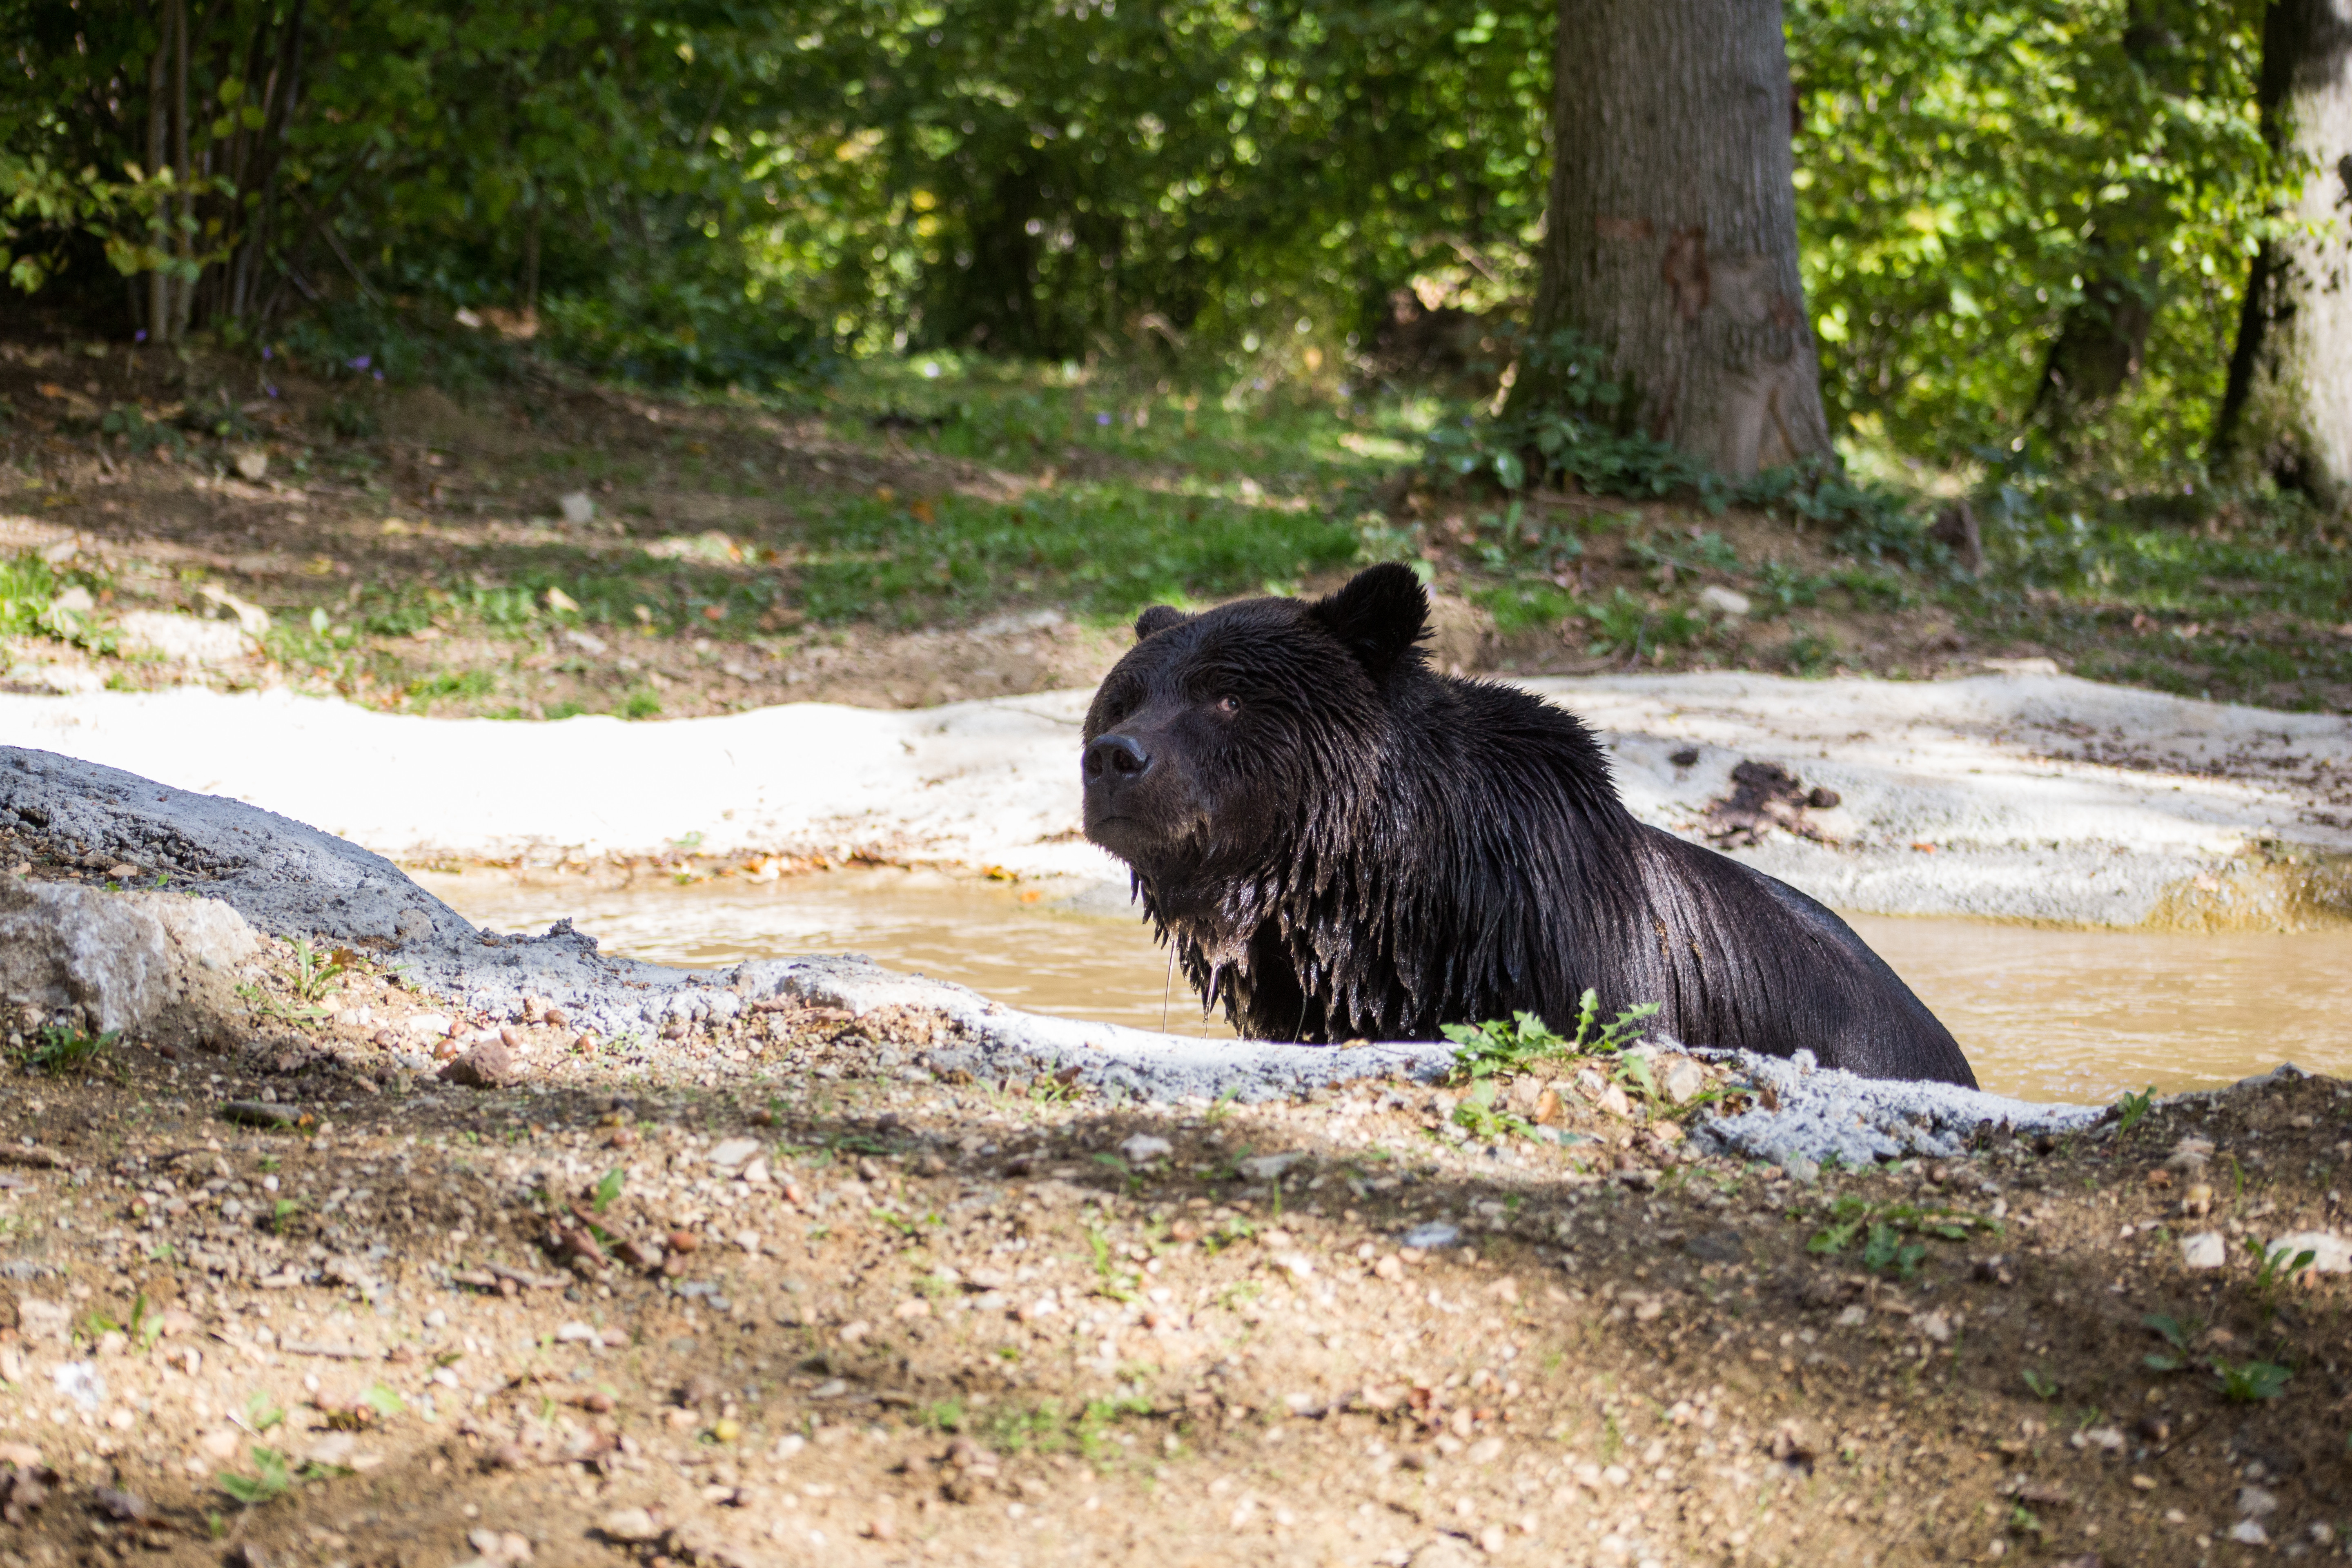 Max swimming in the 'spa' at the Romanian bear sanctuary